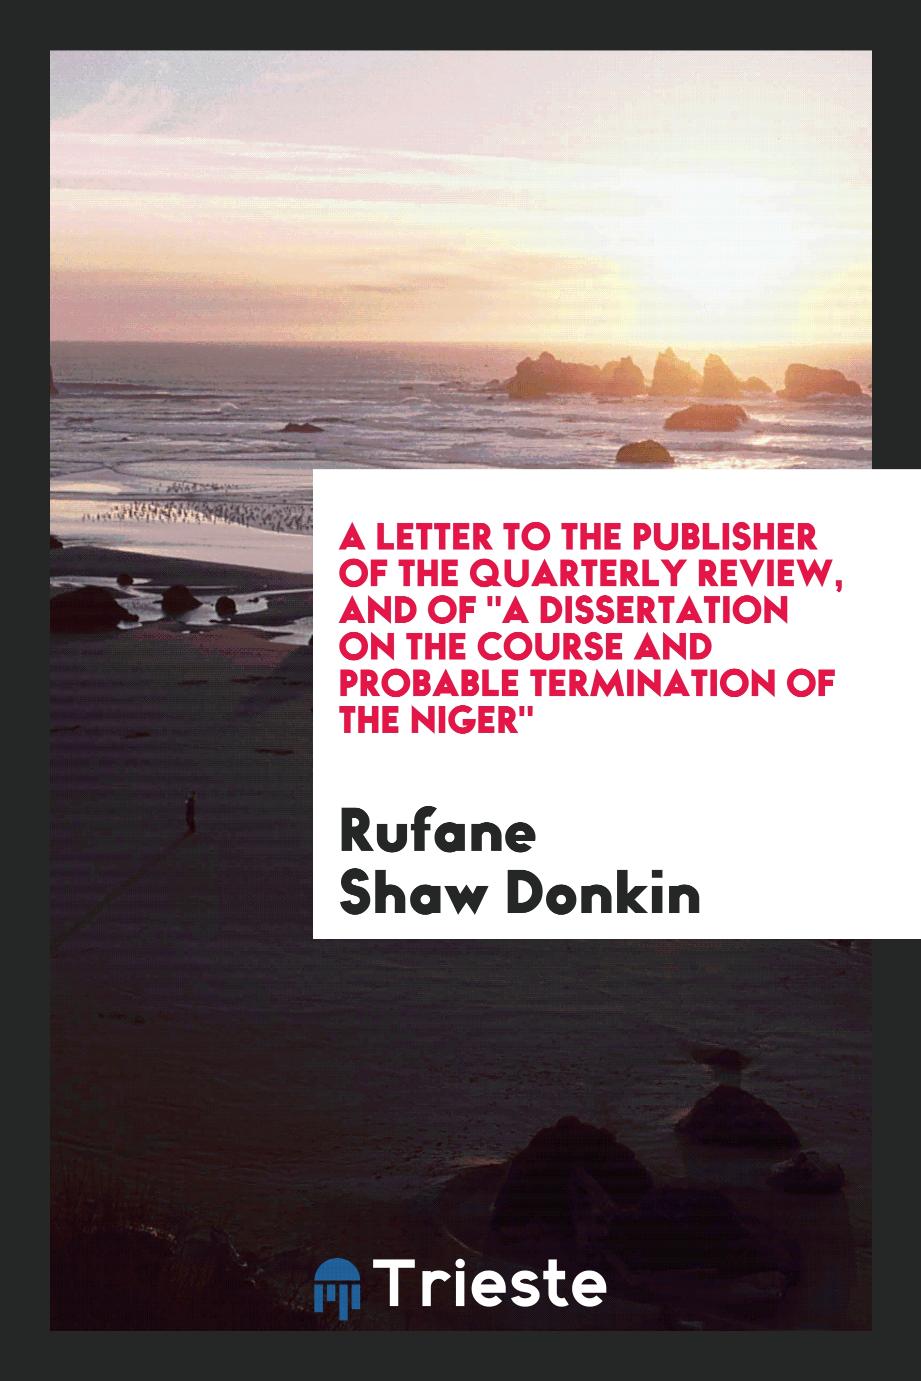 A Letter to the Publisher of the Quarterly Review, and of "A Dissertation on the course and probable termination of the Niger"